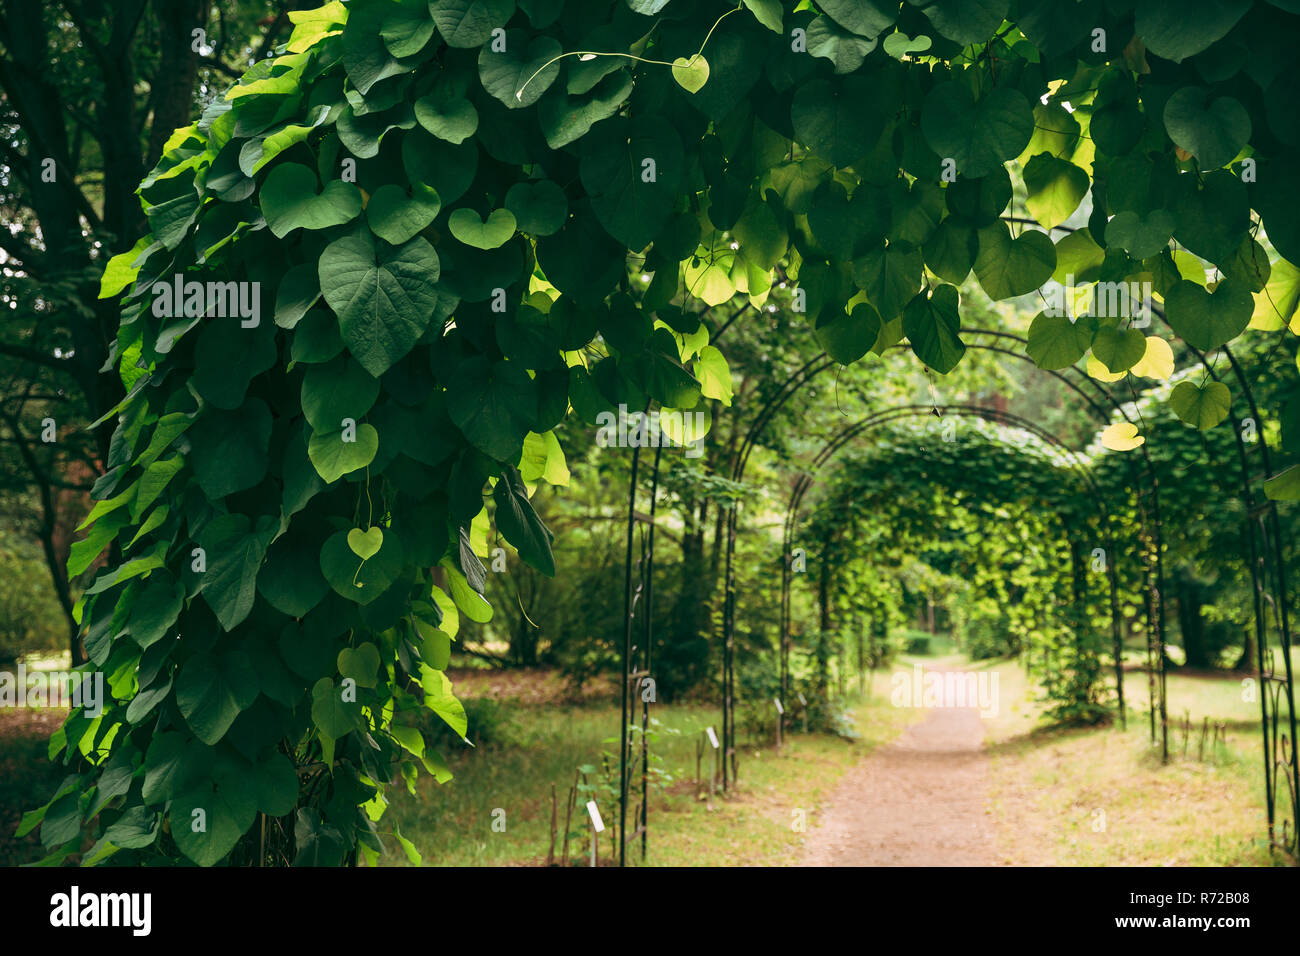 Beautiful Alley In Park. Walkway Lane Path Through Pergola With Green Leaves Of Aristolochia Macrophylla In Garden. Dutchman's Pipe Or Pipevine. Arist Stock Photo